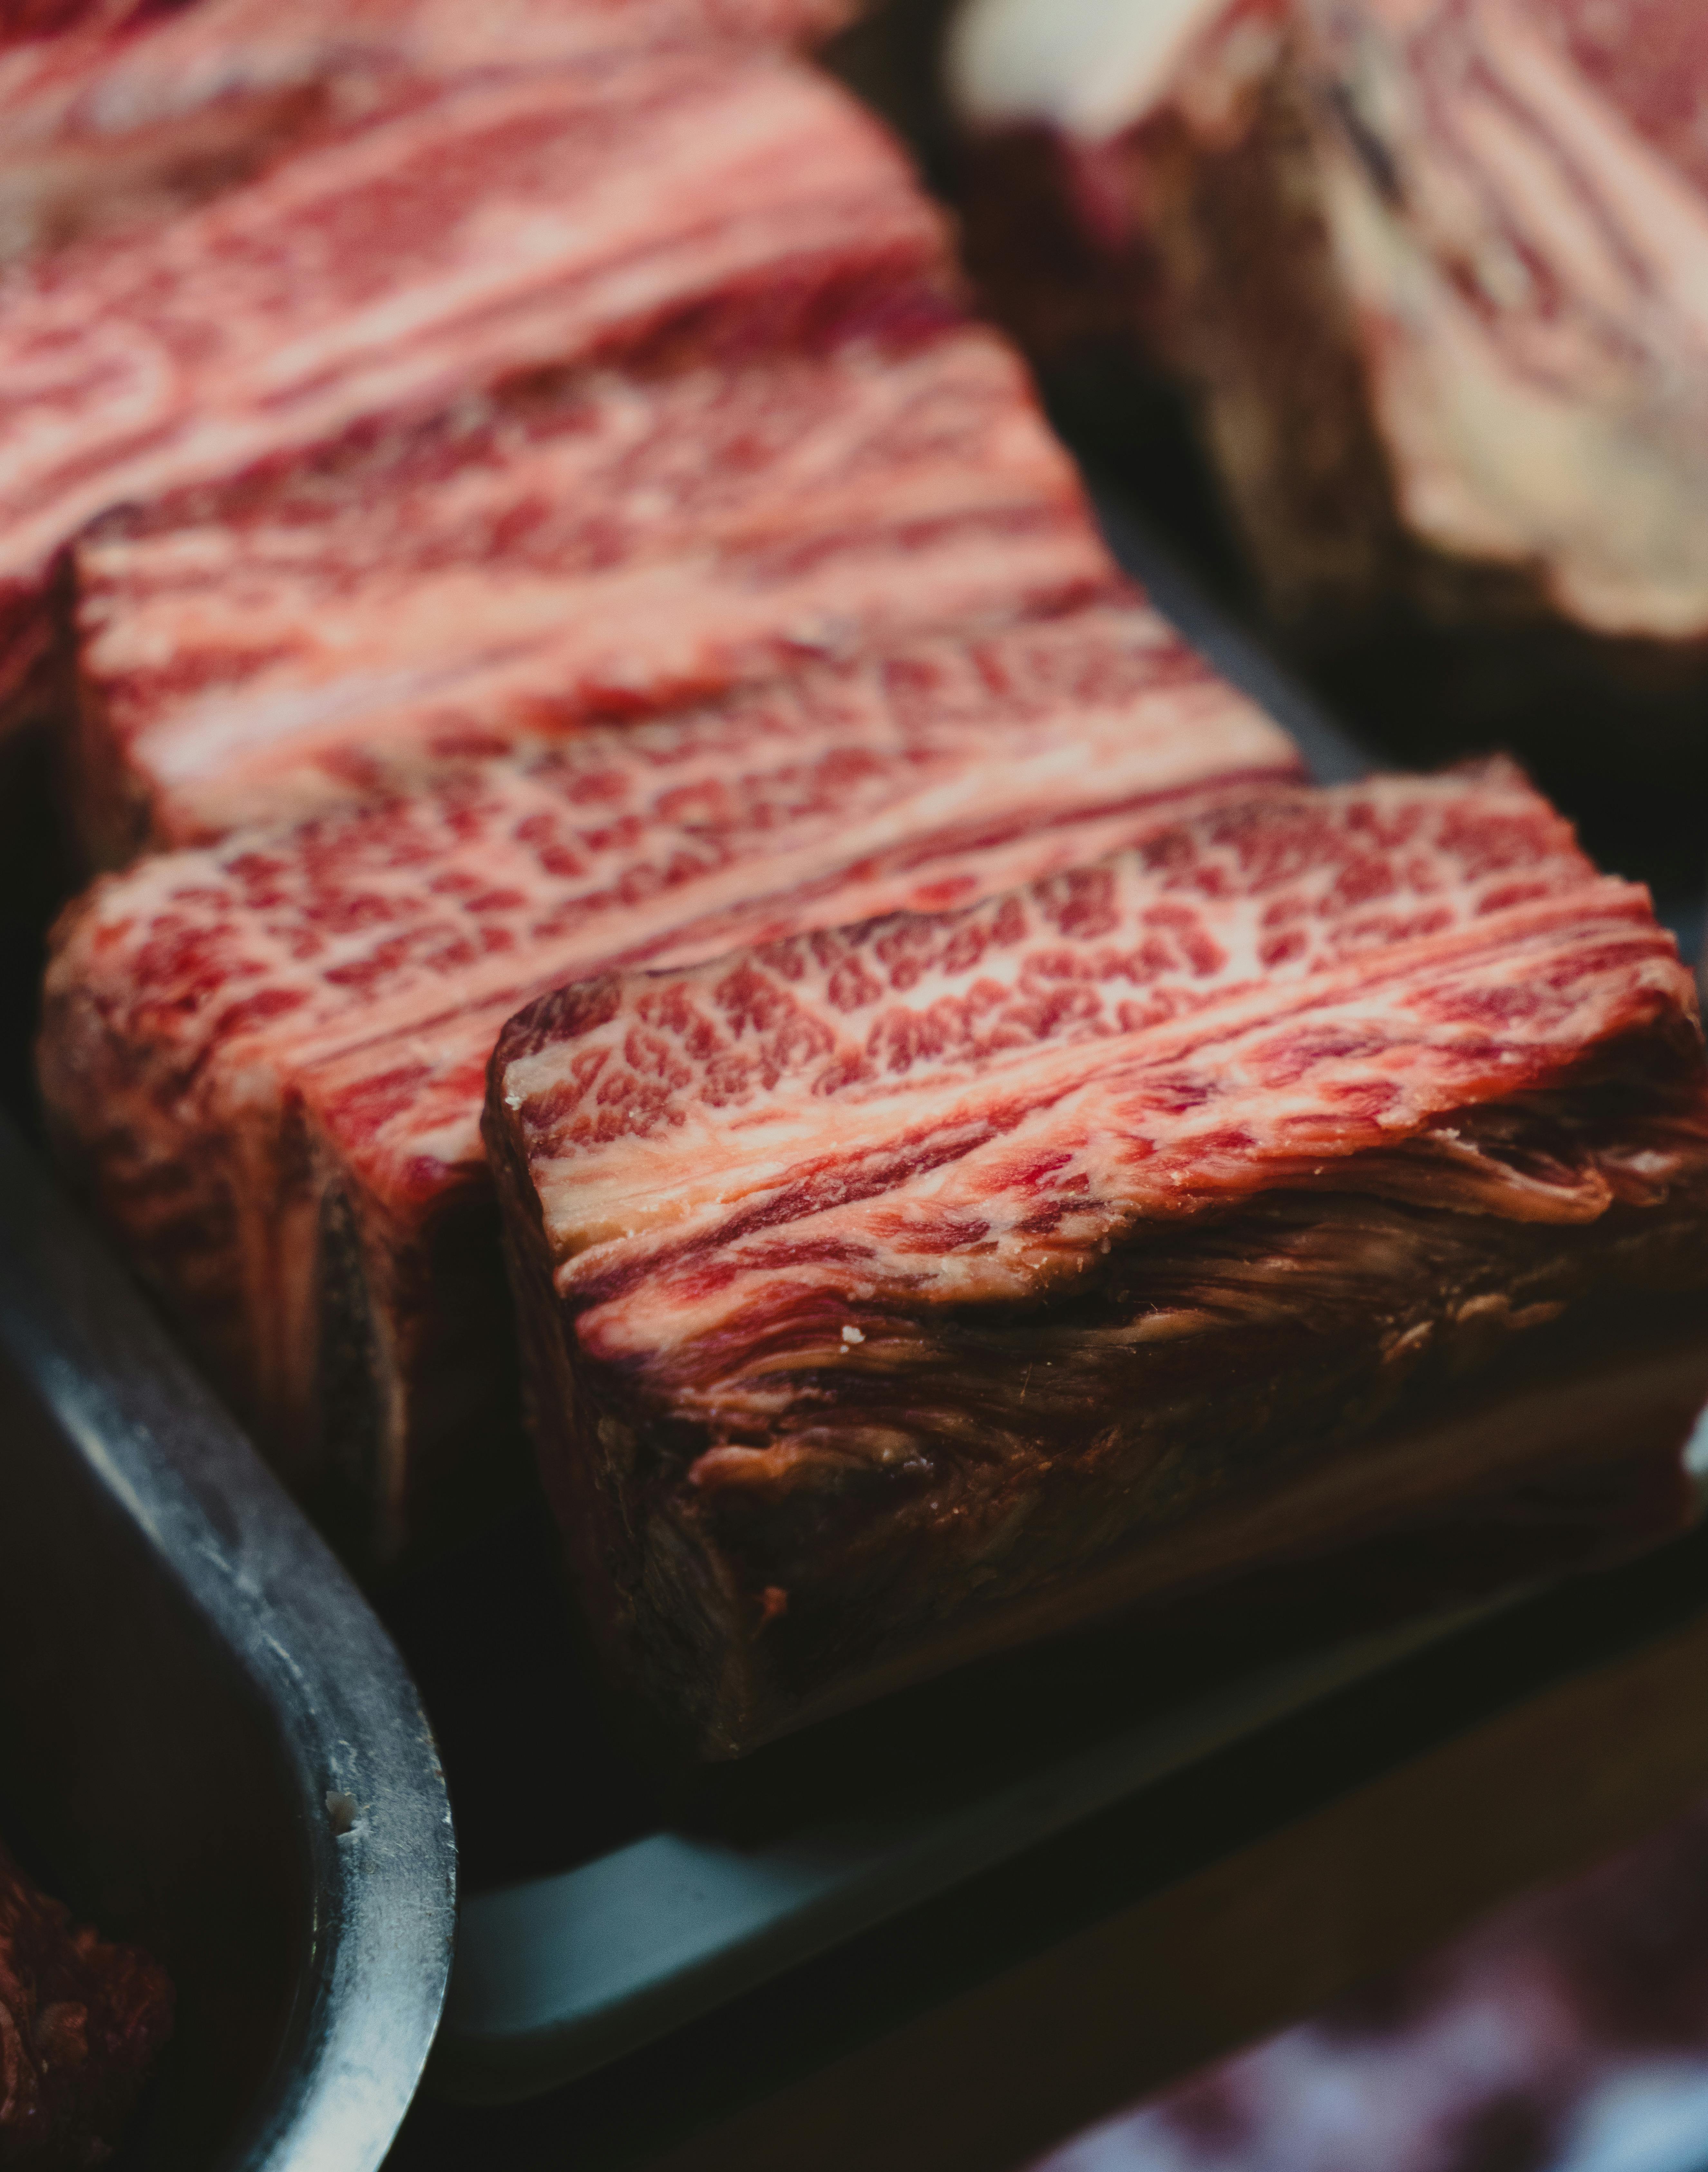 Raw meat on a barbecue grill | Source: Pexels